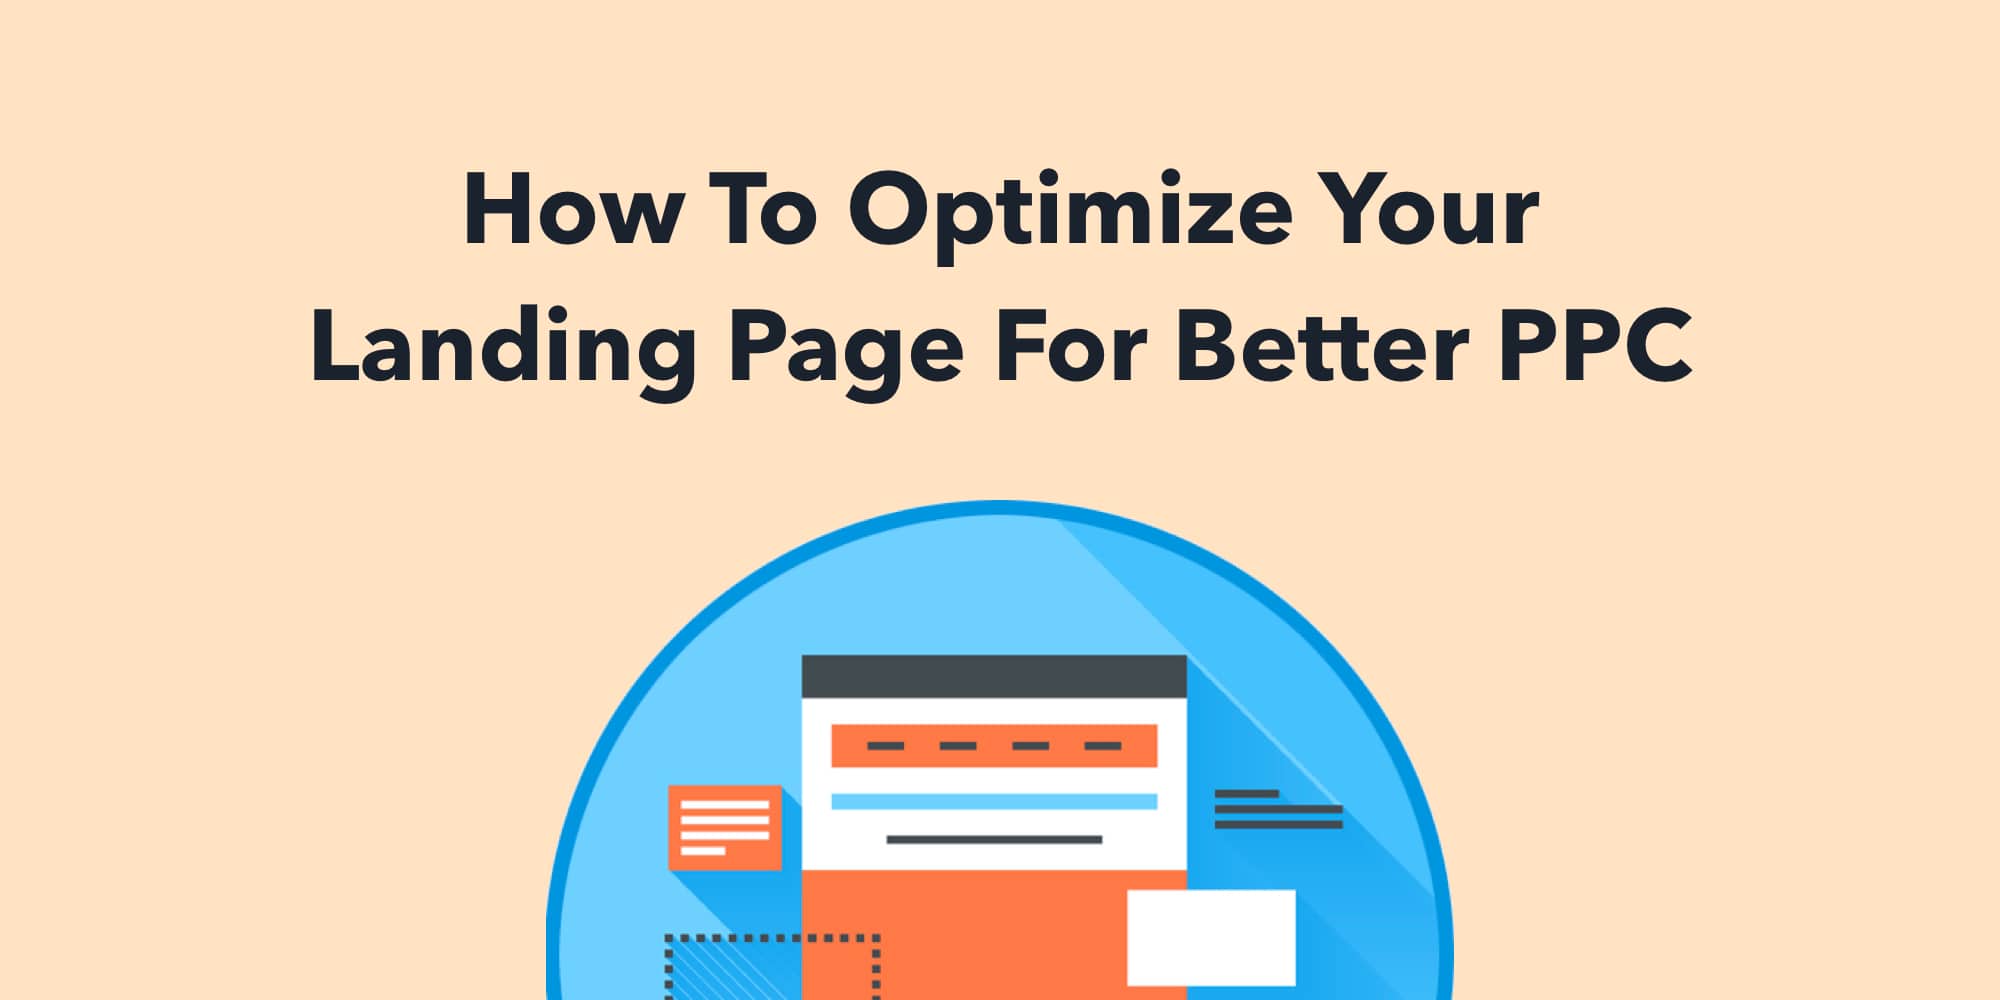 How To Optimize Your Landing Page For Better PPC